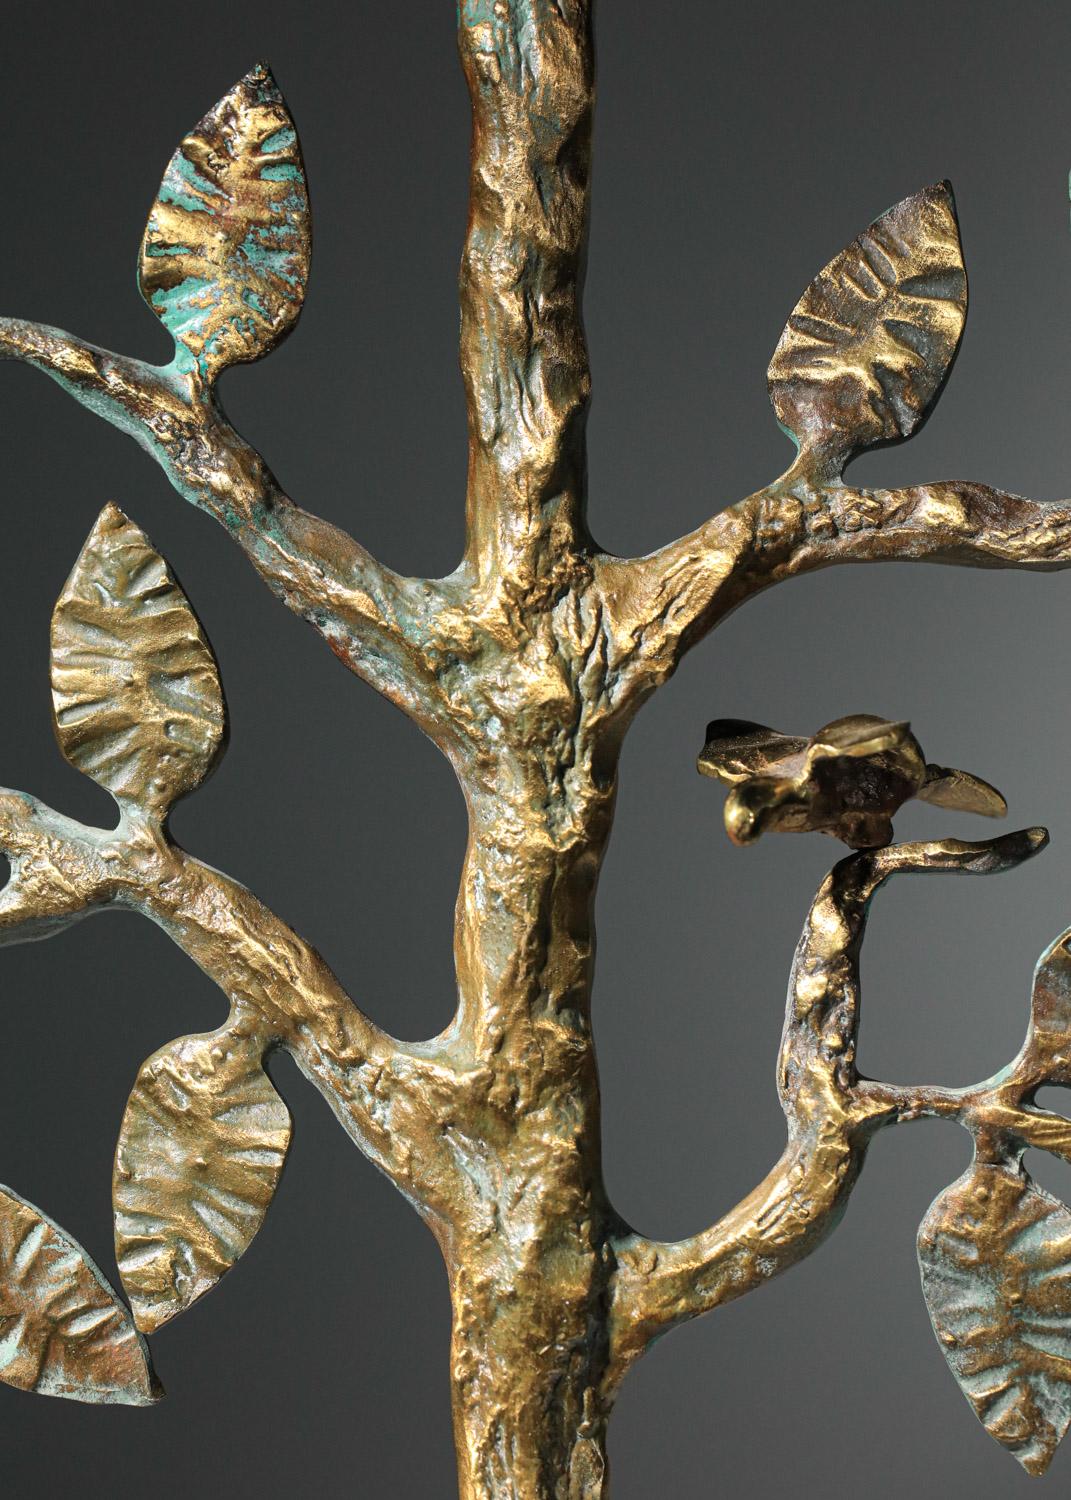 Sculptural table lamp from the 1960s in the style of Diego Giacometti. Solid bronze base with gilded patina, in the shape of a tree with leaves and a bird. A highly decorative and poetic lamp. Very fine vintage condition with superb patina on the